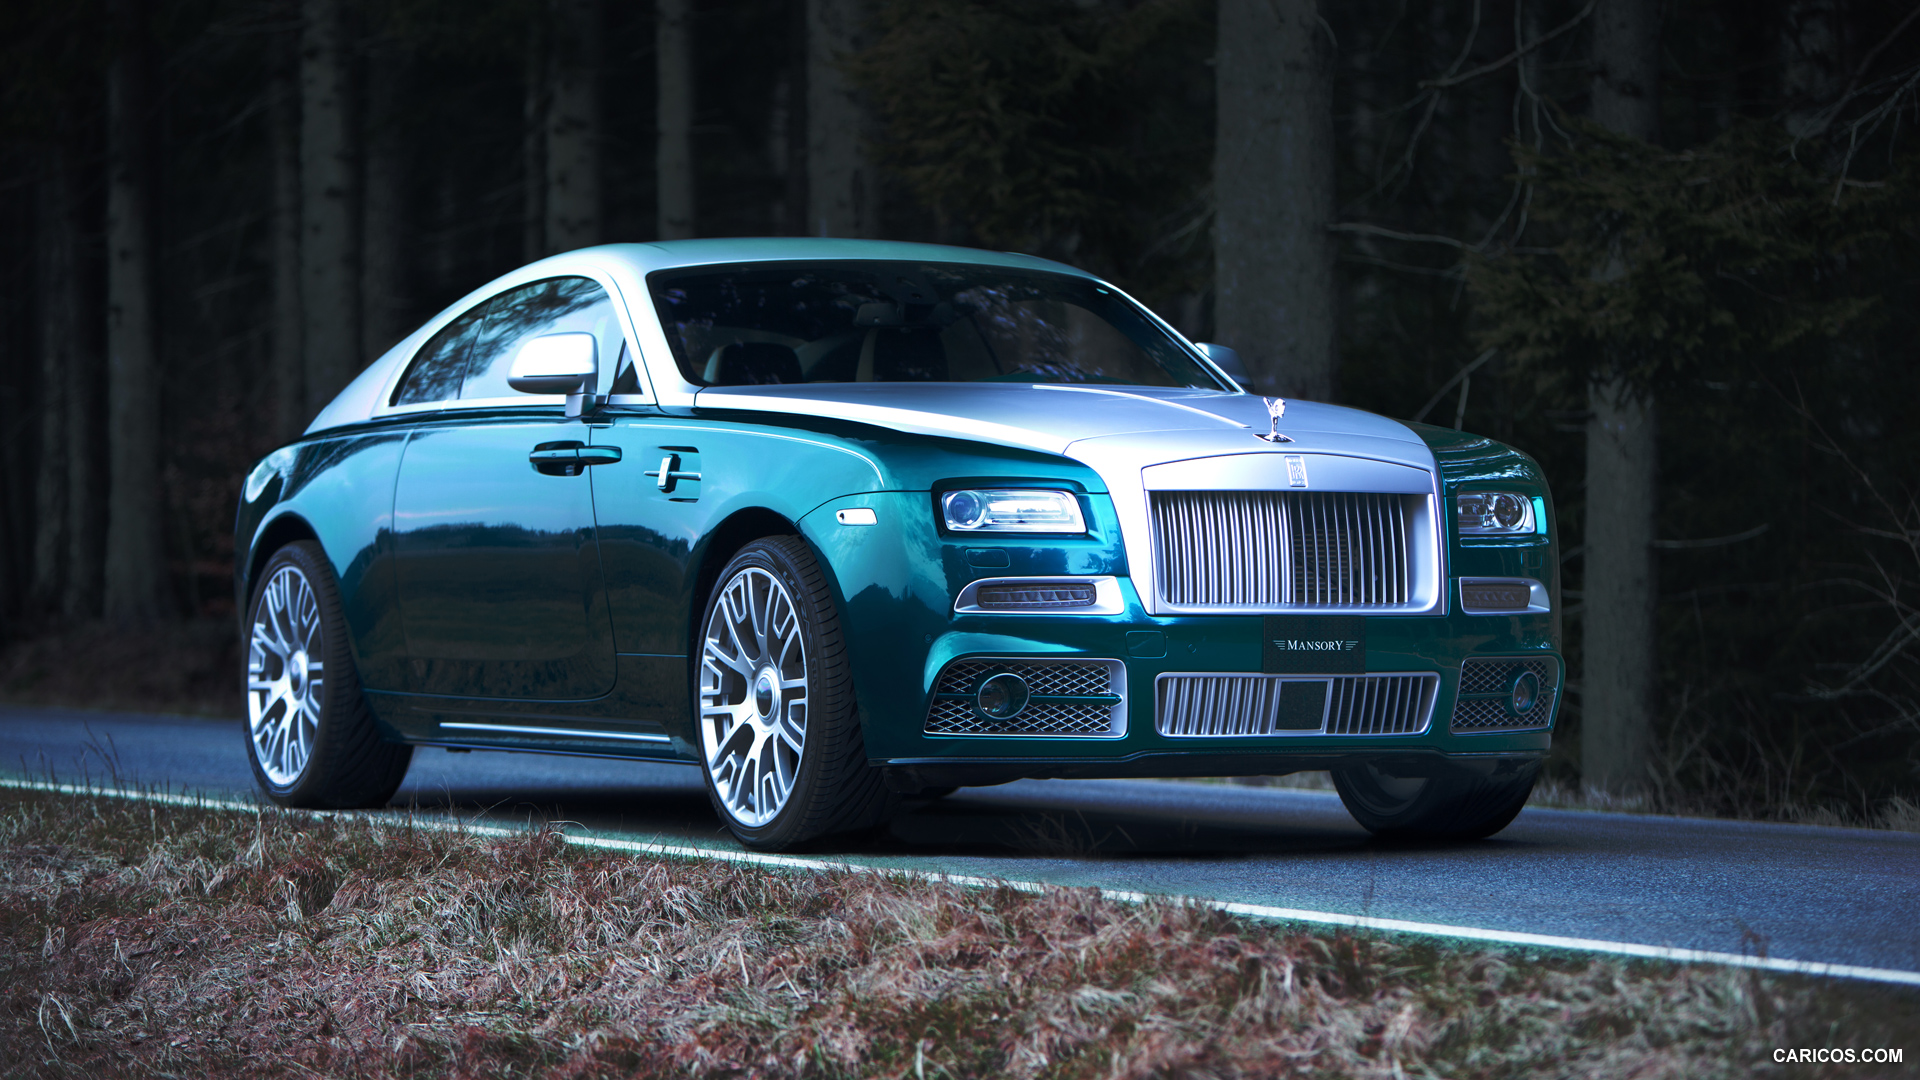 2014 Mansory Rolls-Royce Wraith with Fog Lights - Front, #1 of 9